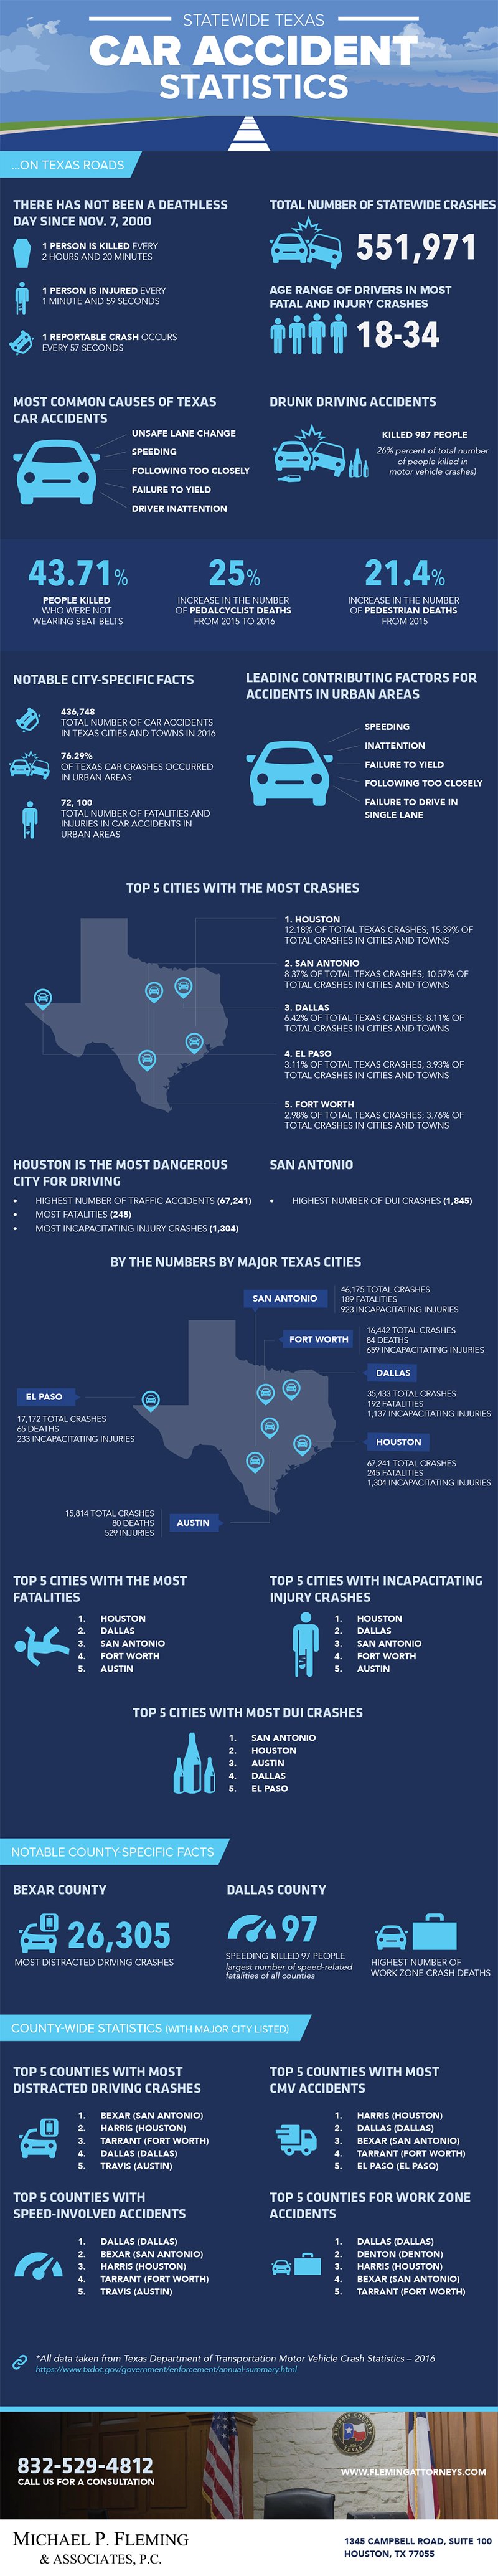 Statewide Texas Car Accident Statistics infographic